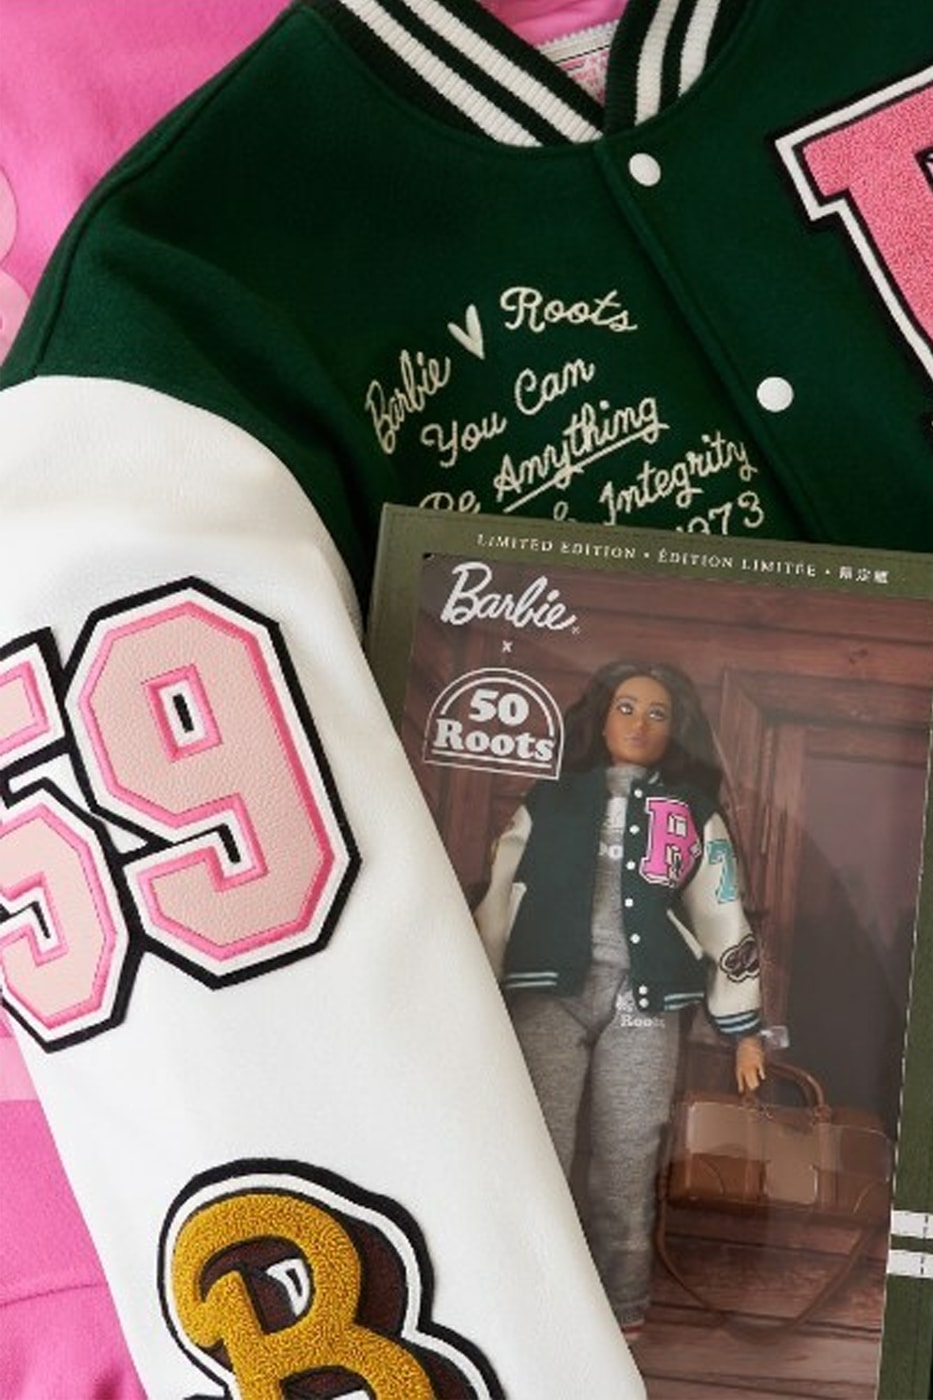 Roots Celebrates 50 Years With Barbie Collaboration varsity jacket icon barbie doll limited edition exclusive barbie decals canadian lifestyle brand canada